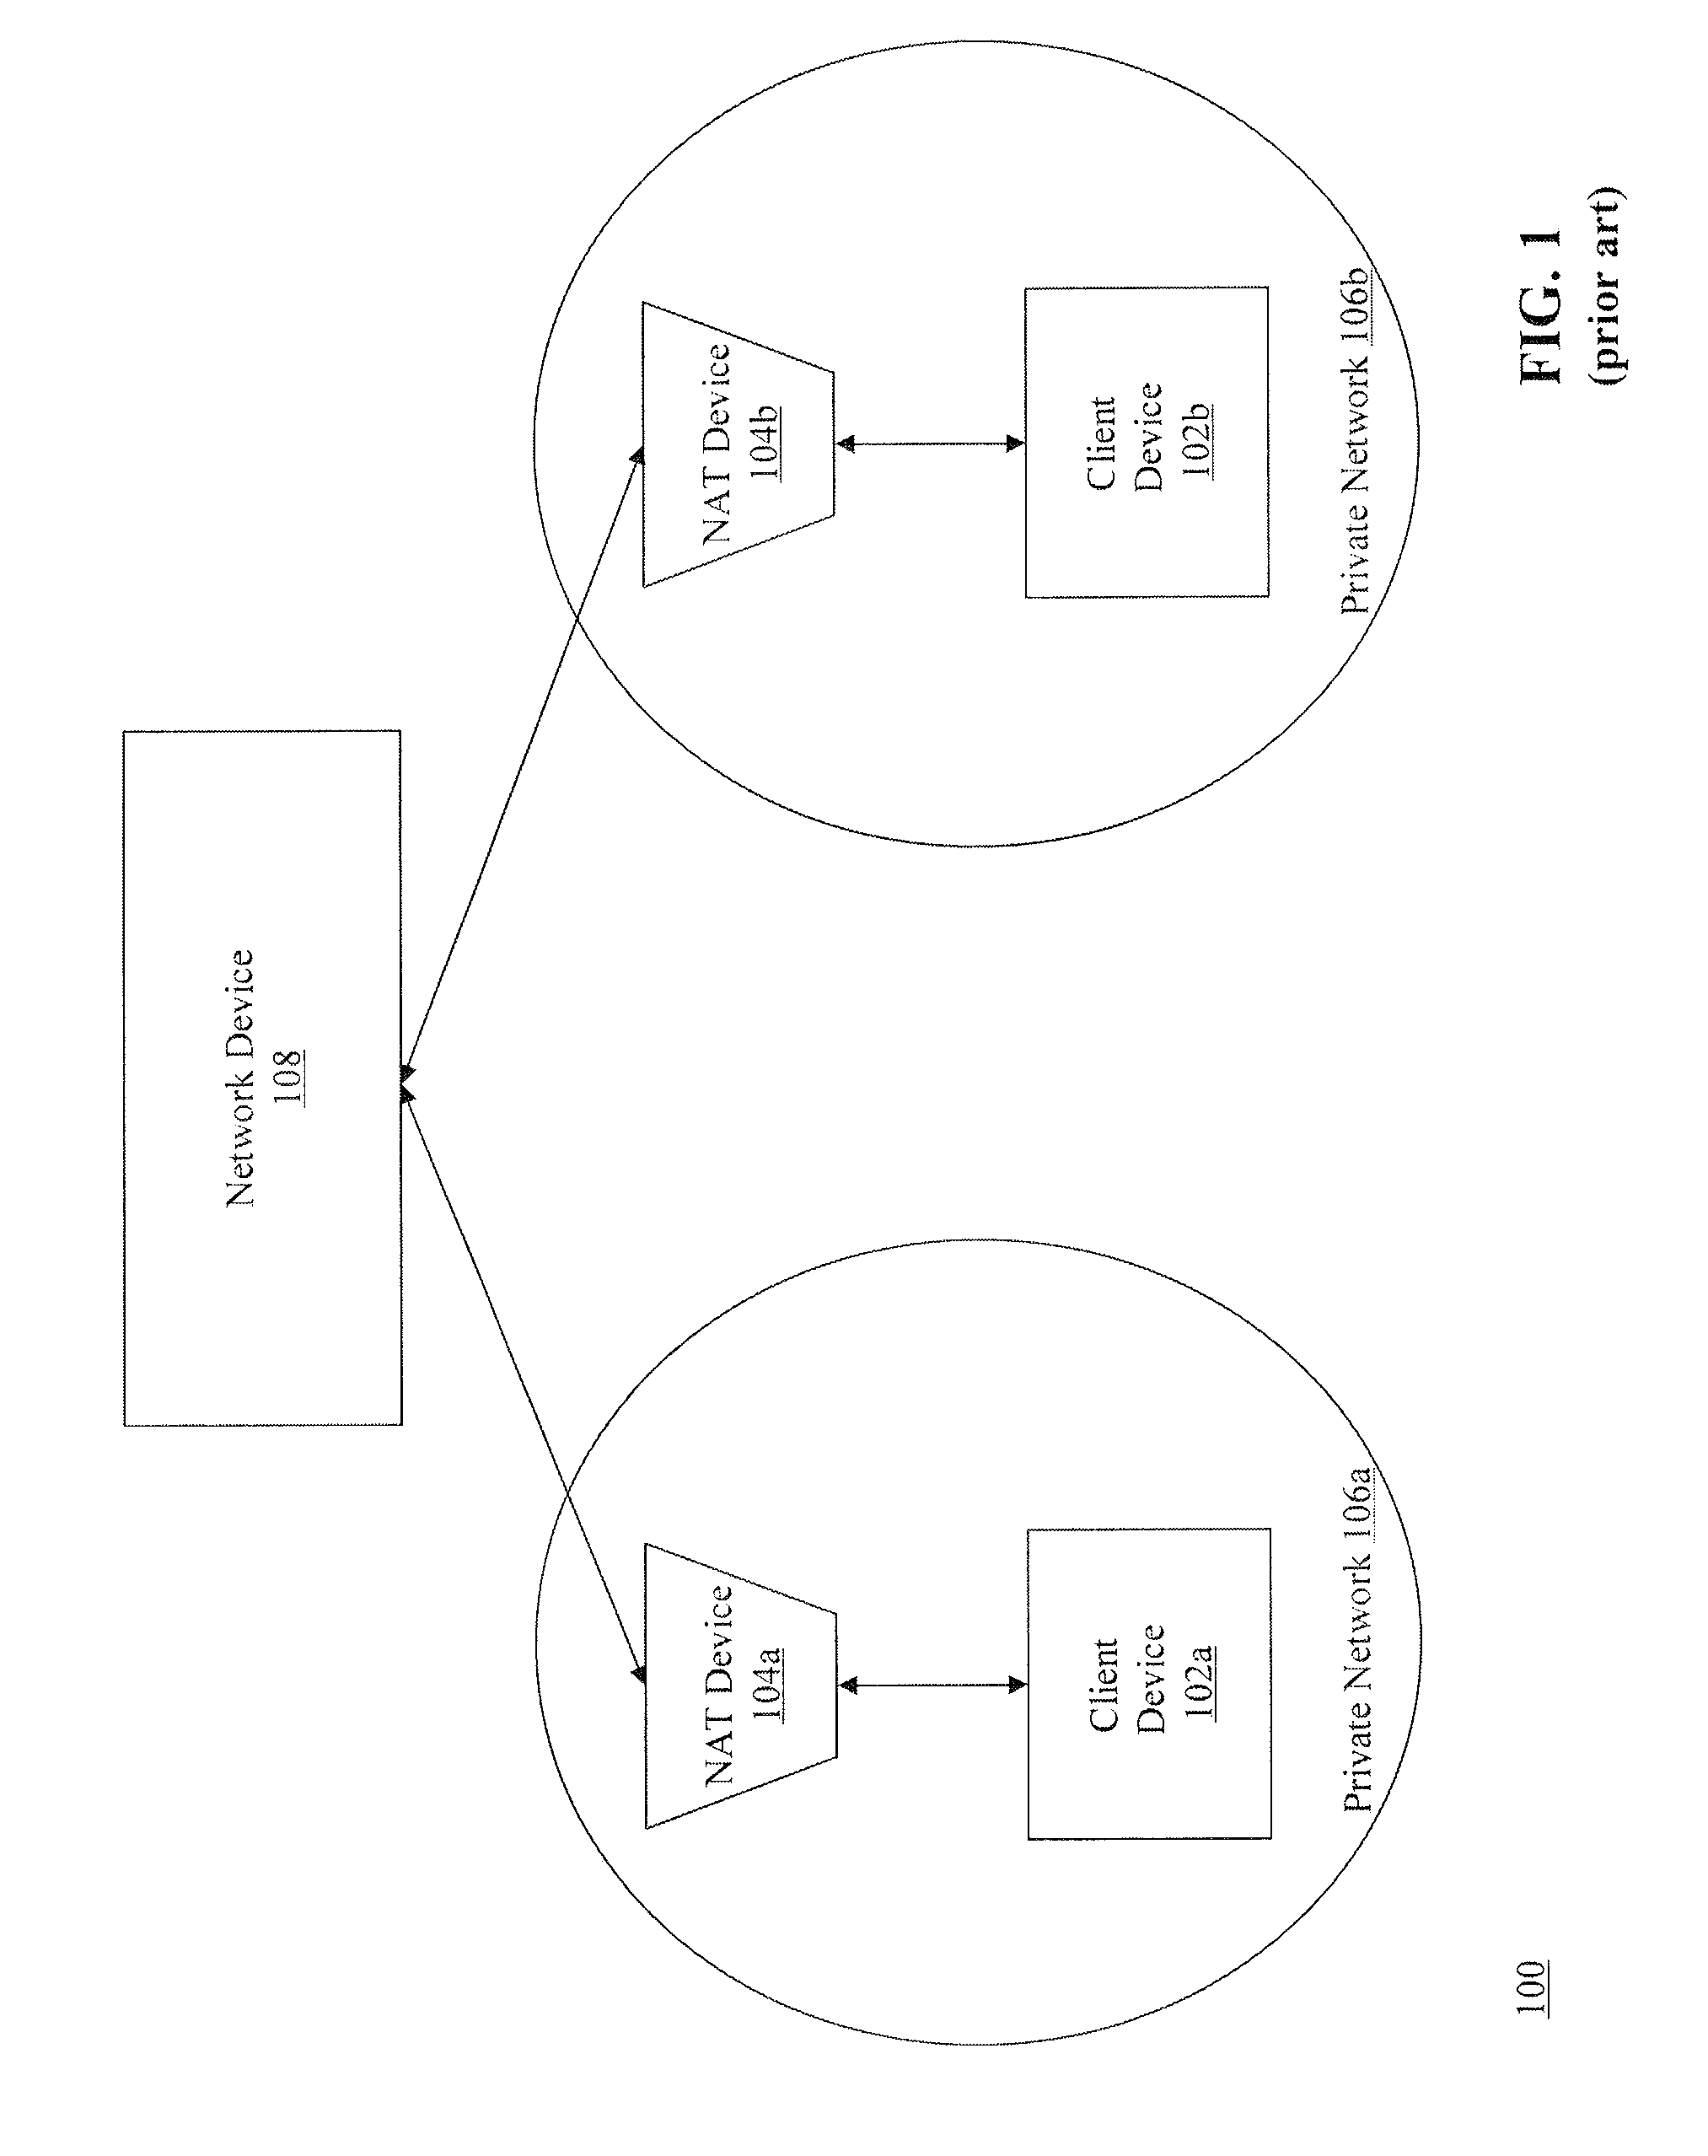 Determining expiration time of bindings for network address translation devices